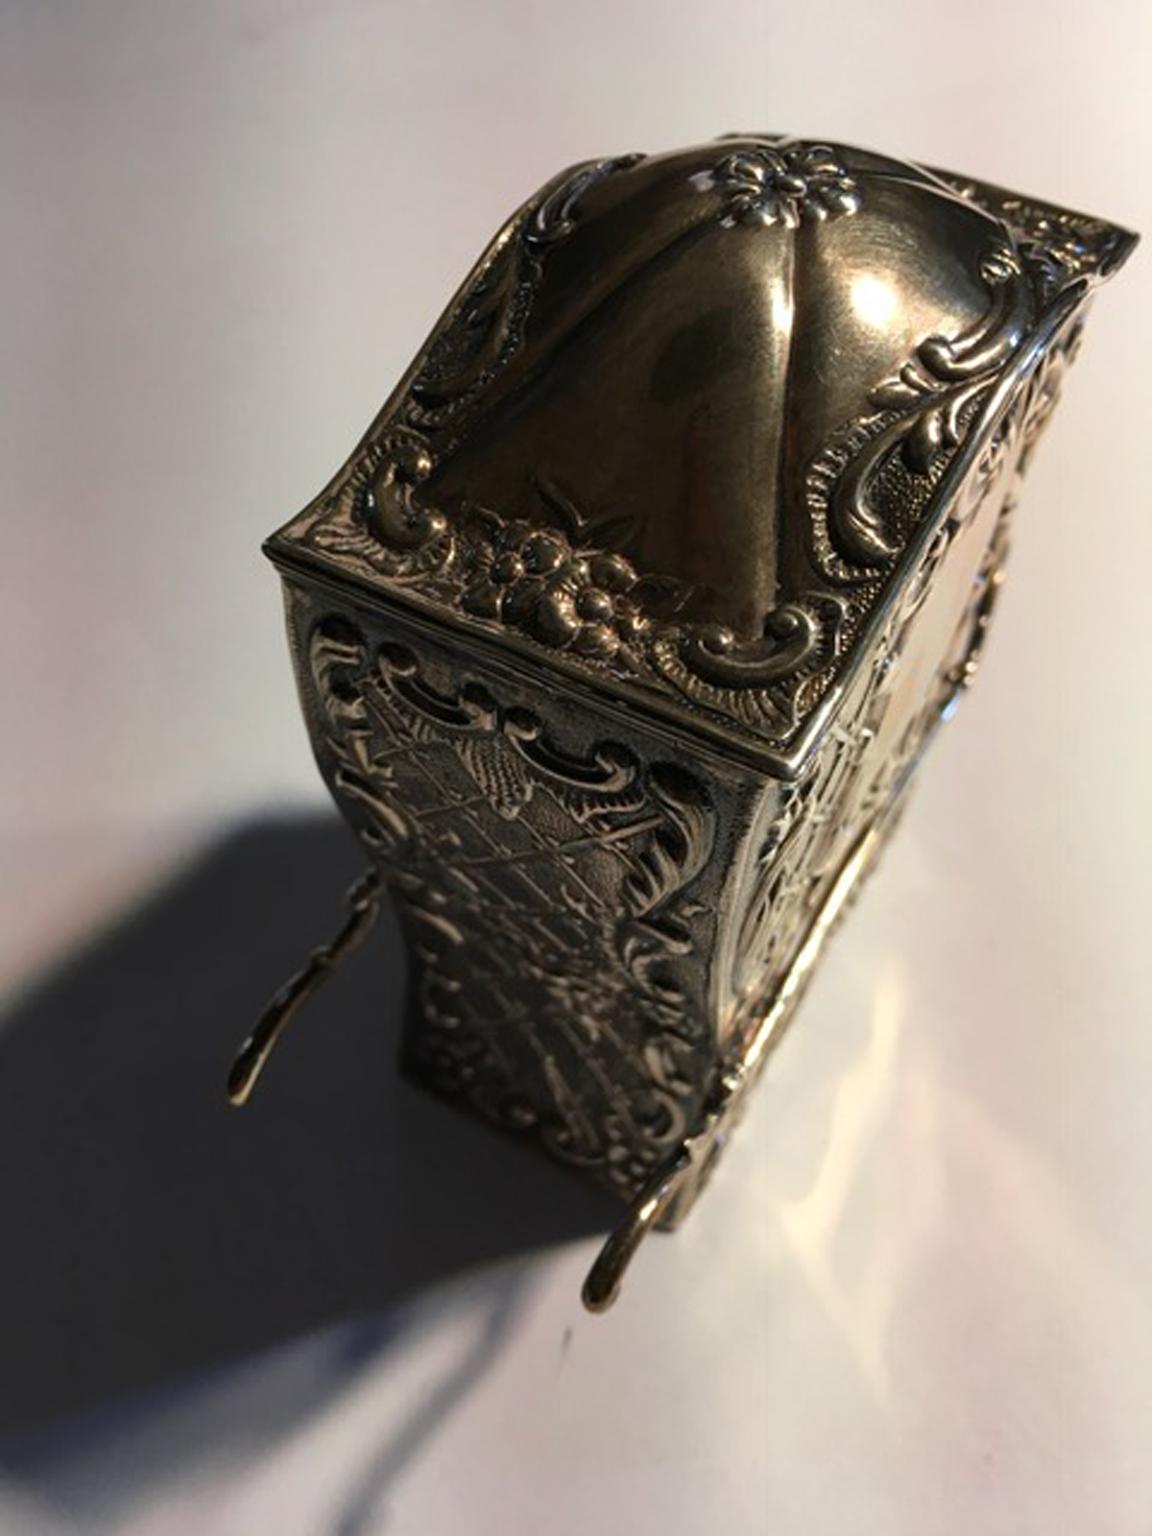 France Late 18th century silver carriage shape box in Regency Style

This magnificent piece of art of silver jewelery. It is an example of high level of French artisans hand-crafting work. Every detail is finely chiseled.
An unusual and elegant